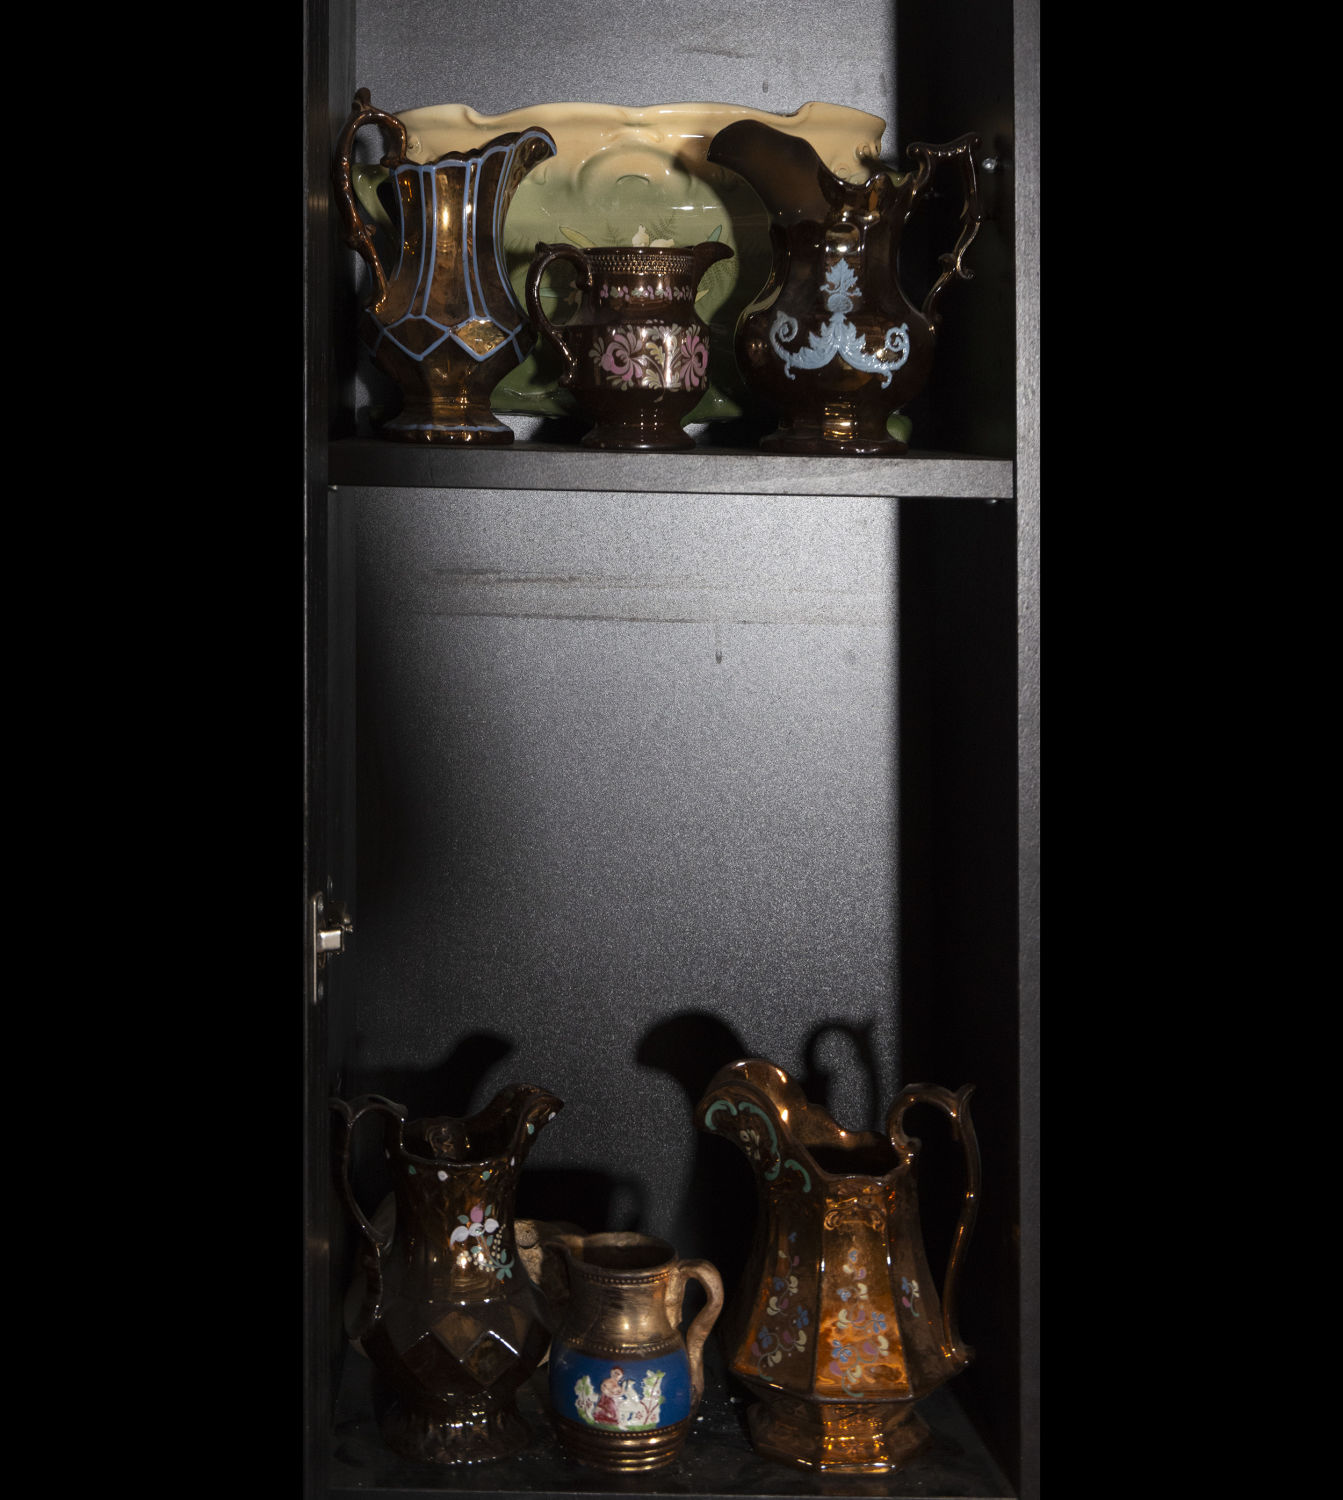 Collection of 78 English Earthenware Jugs from the 19th to 20th centuries - Image 10 of 10